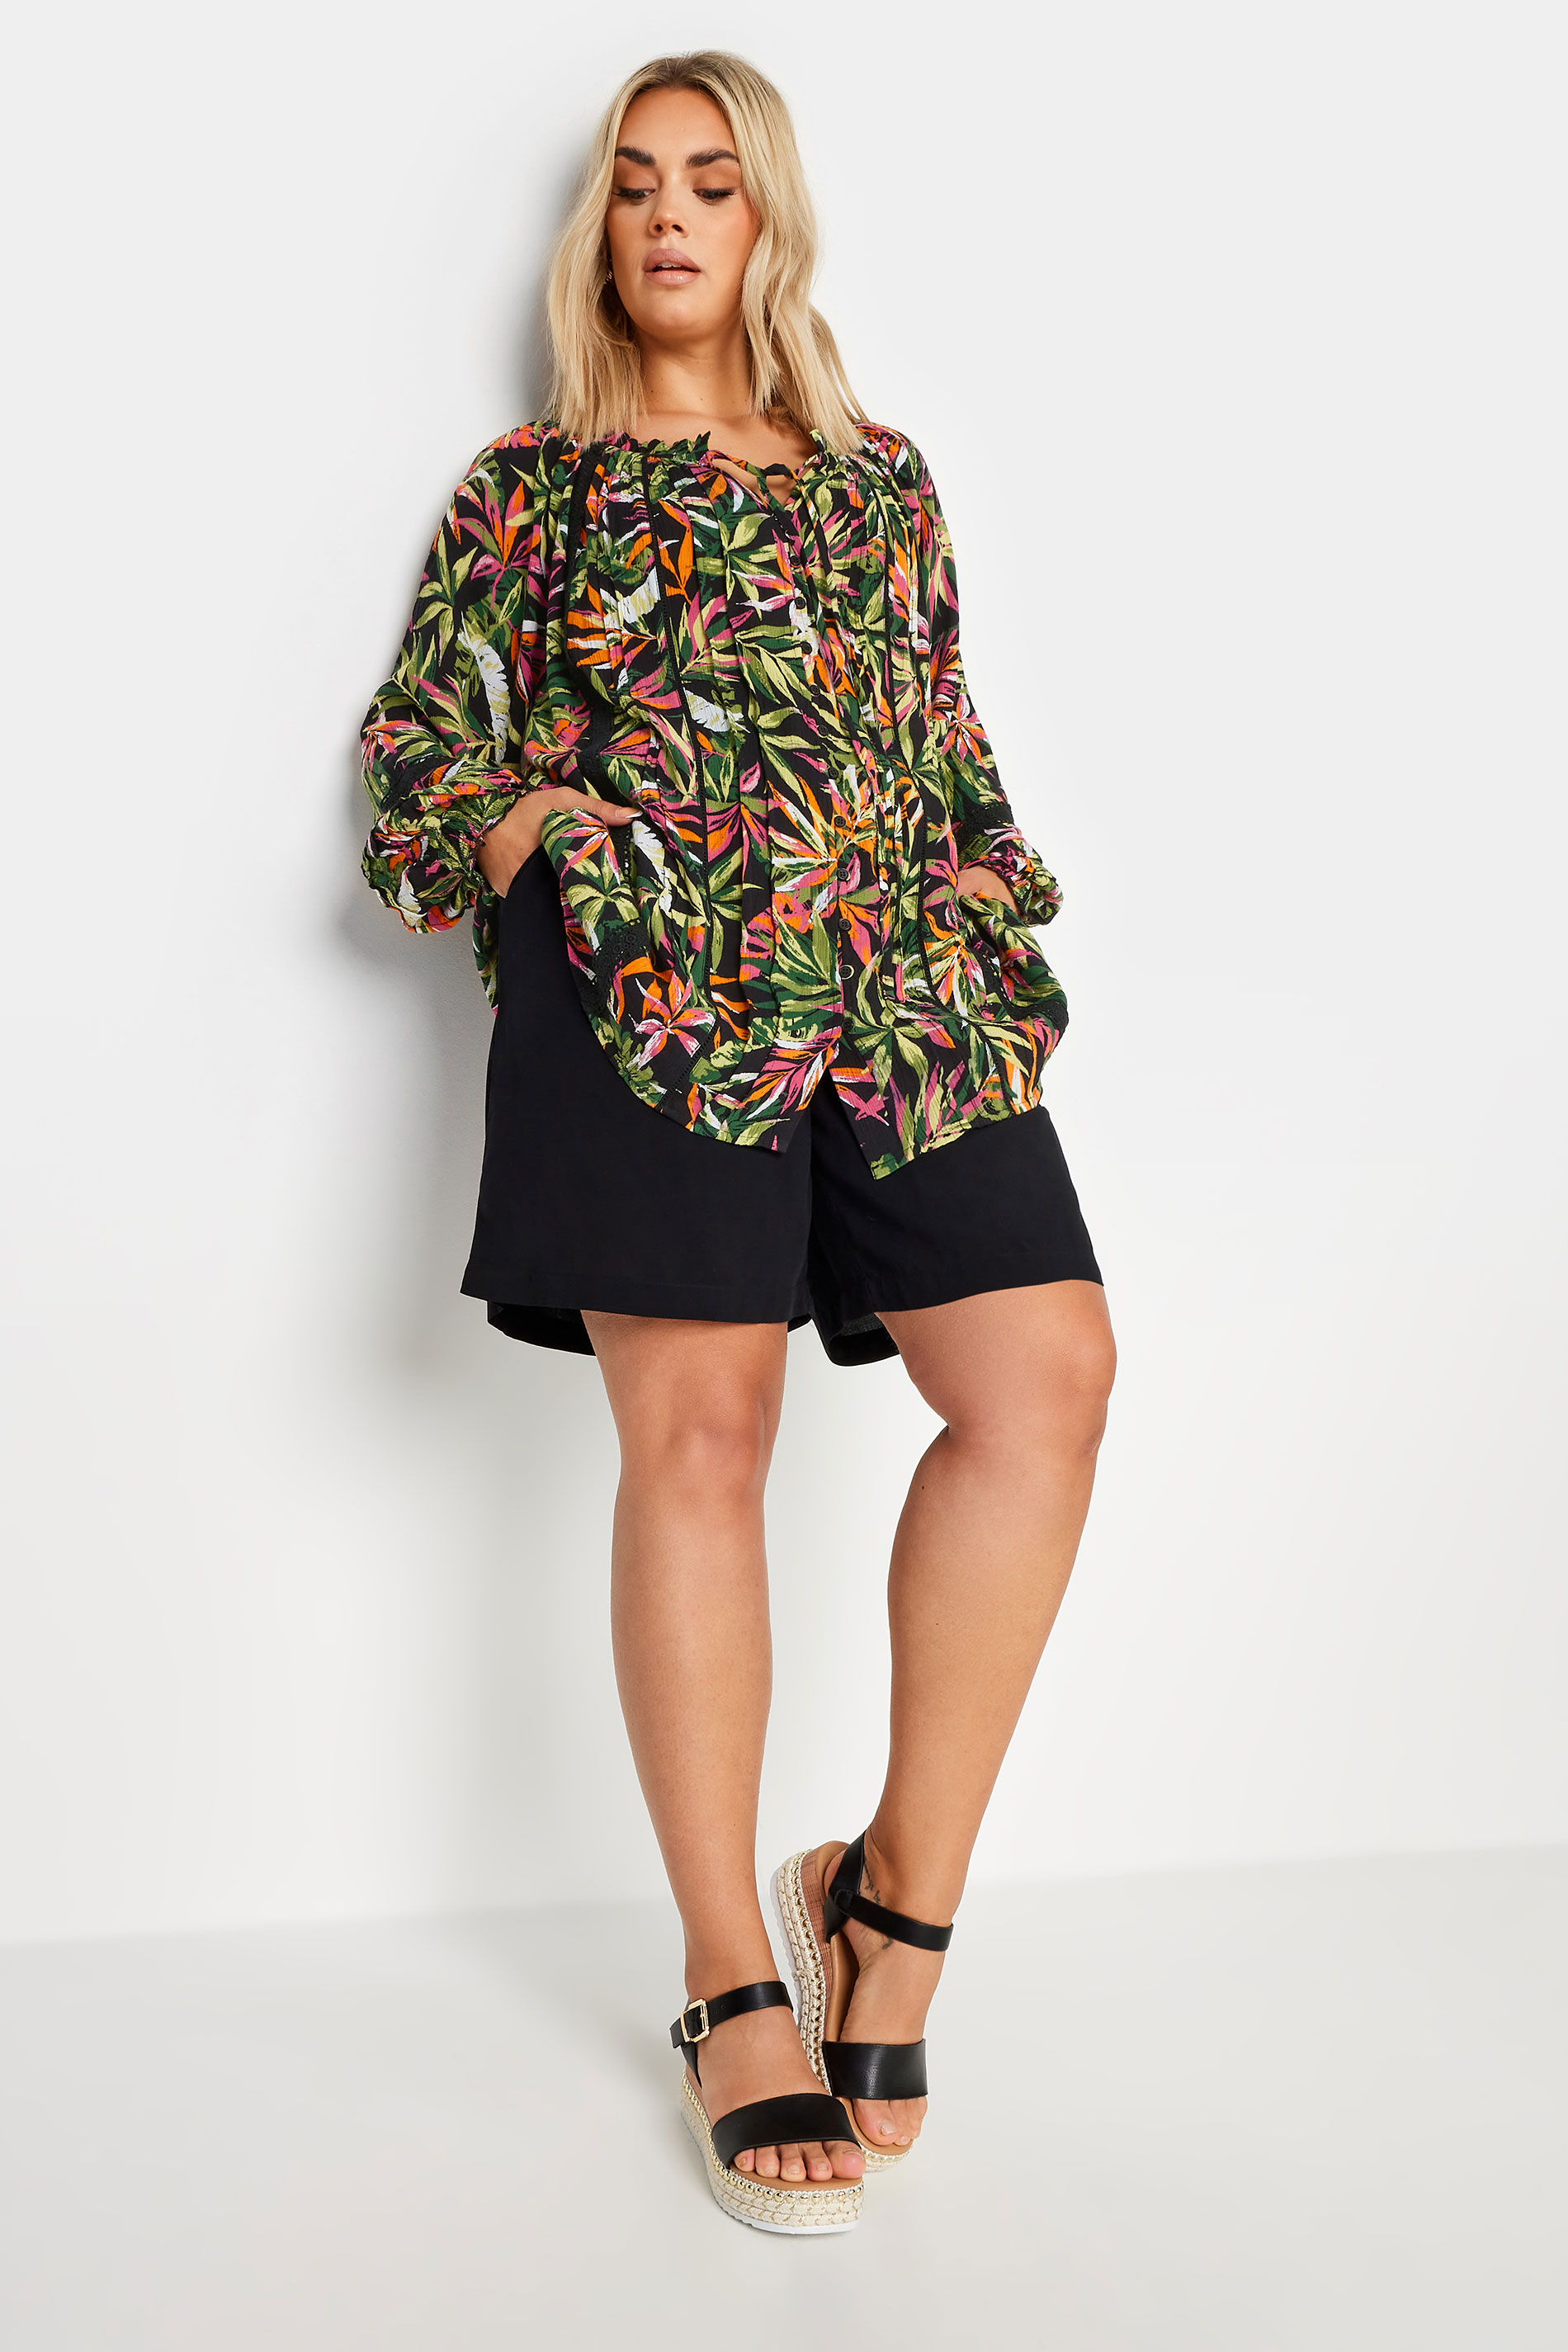 YOURS Plus Size Black Tropical Print Tie Front Crochet Top | Yours Clothing 2